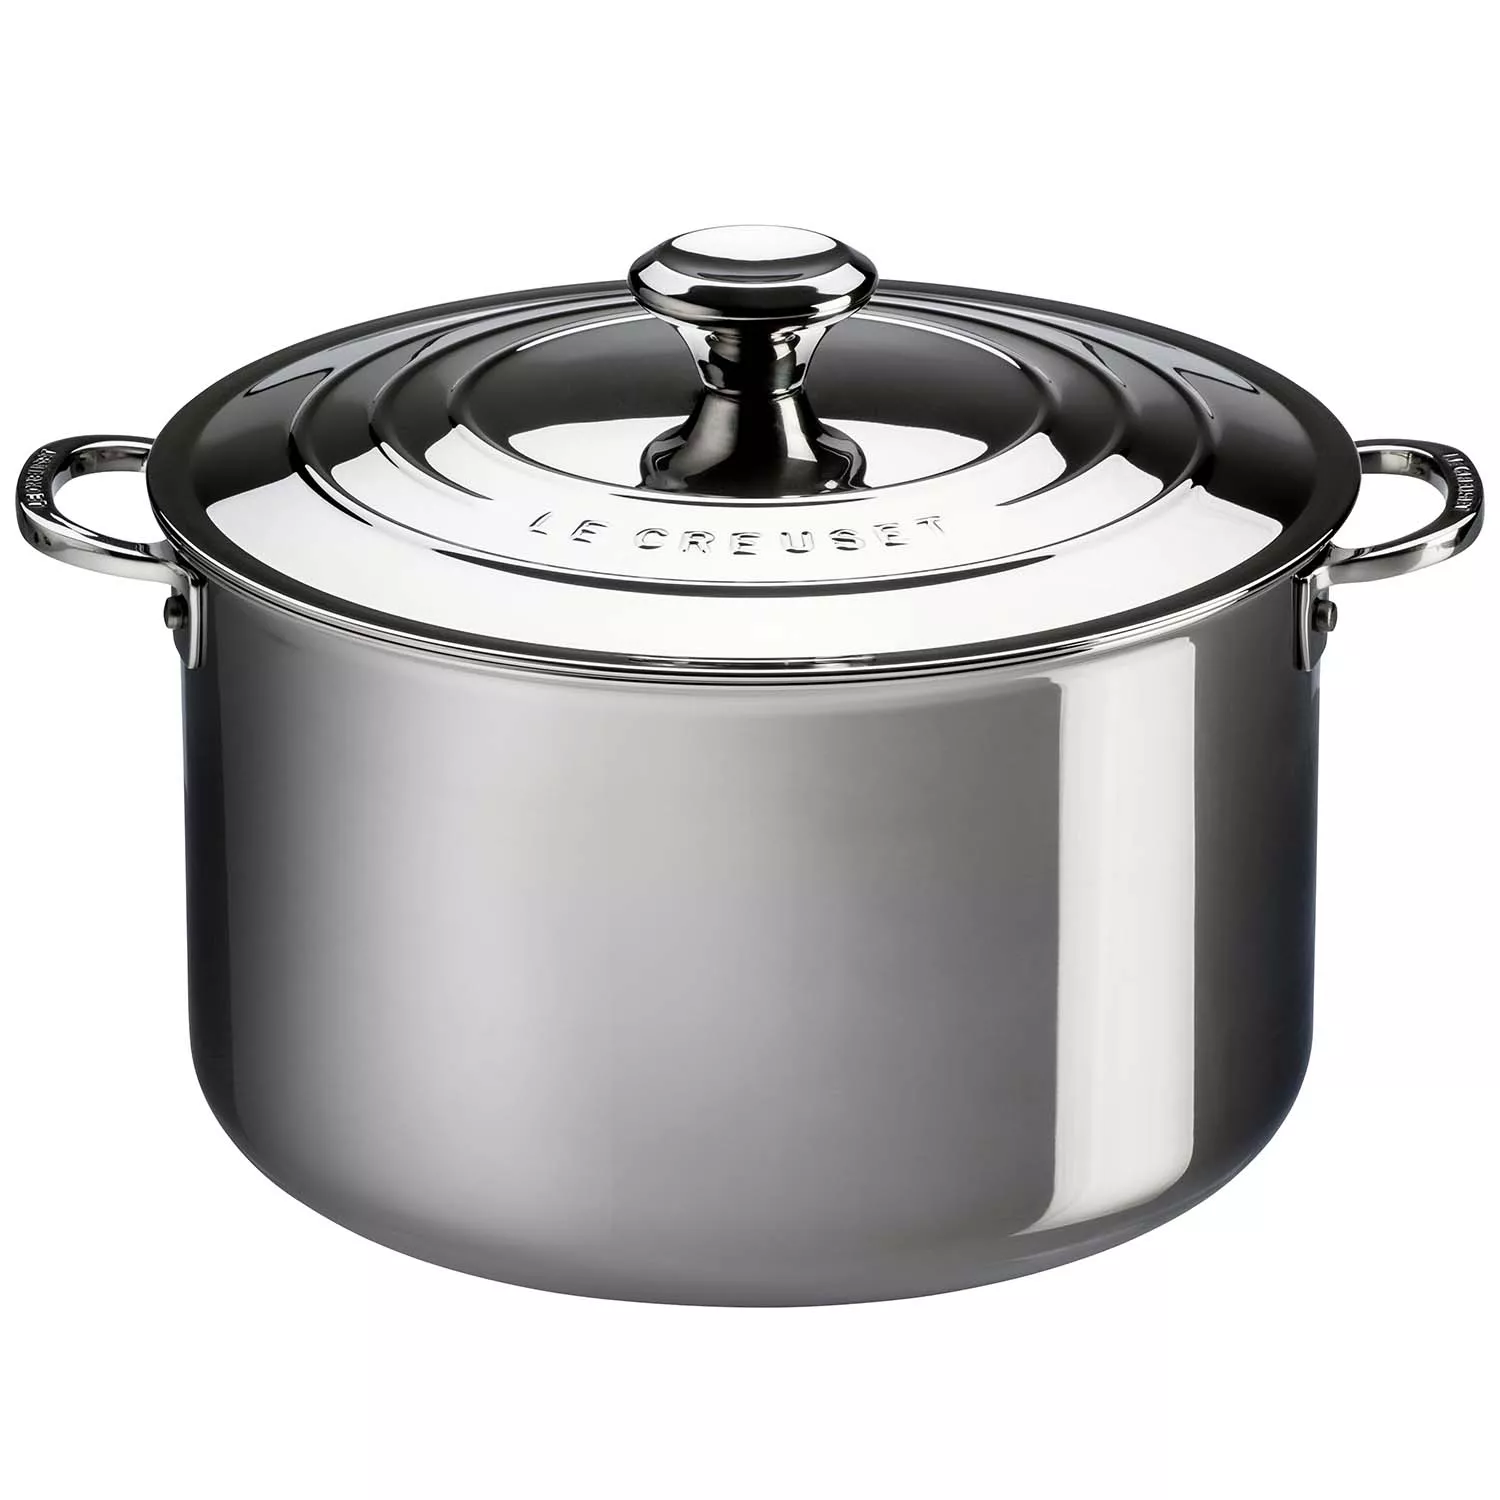 Le Creuset Stainless Steel Nonstick Saucepan with Lid, 3.5 Qt